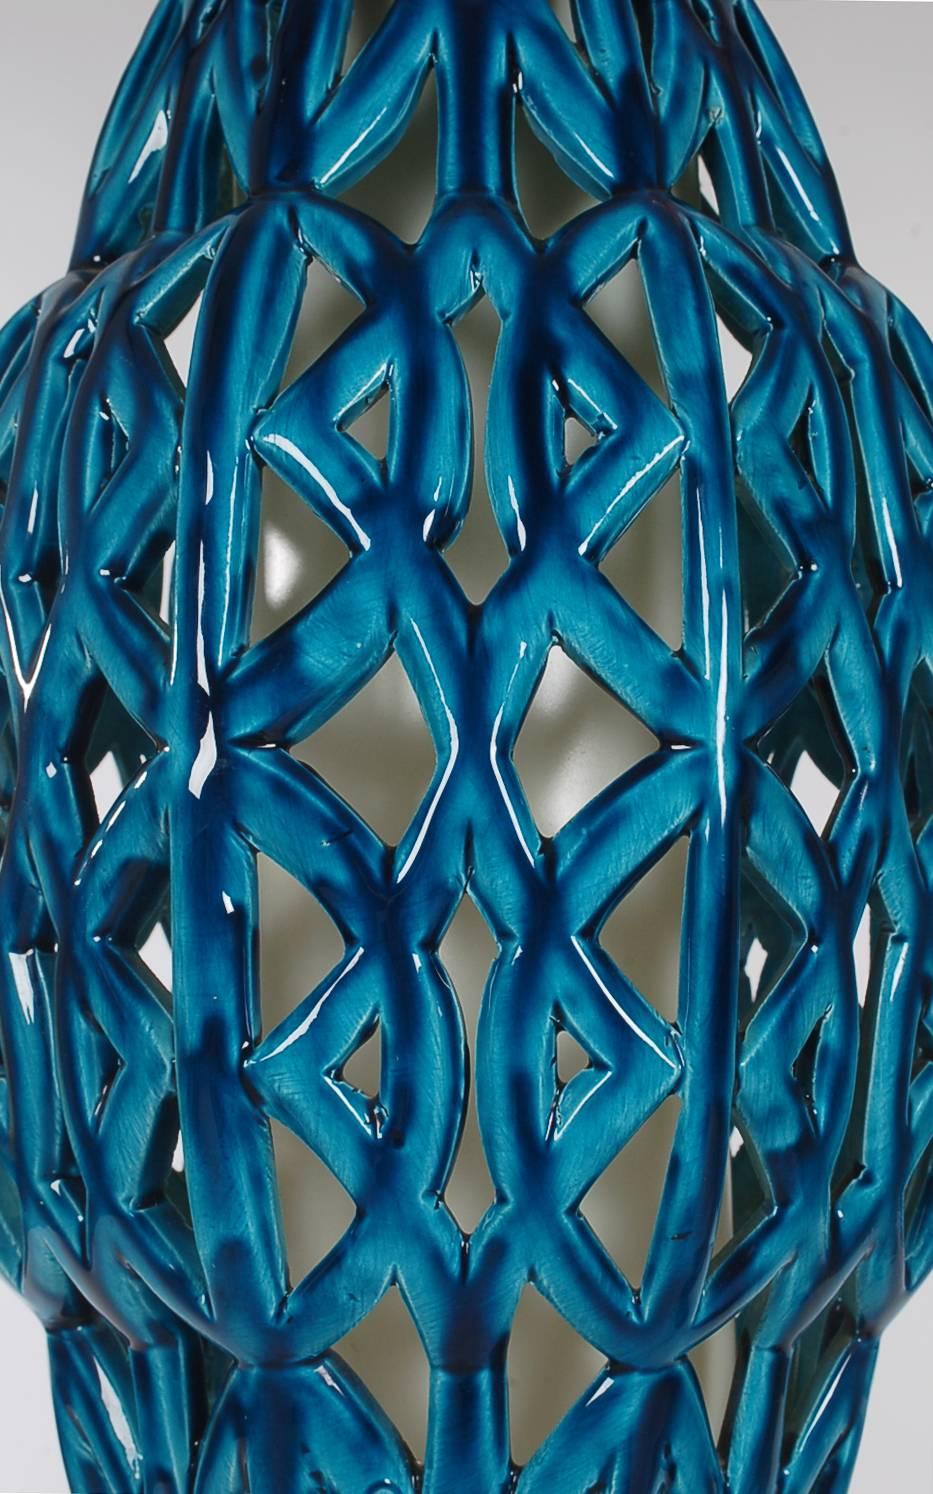 A beautifully crafted basket weave lighting fixture done in a blue glazed ceramic pottery. It has 12 feet of hanging chain and can be plugged into standard outlet or hardwired if desired.

In the style of: Bitossi, Bagni, Gambone.